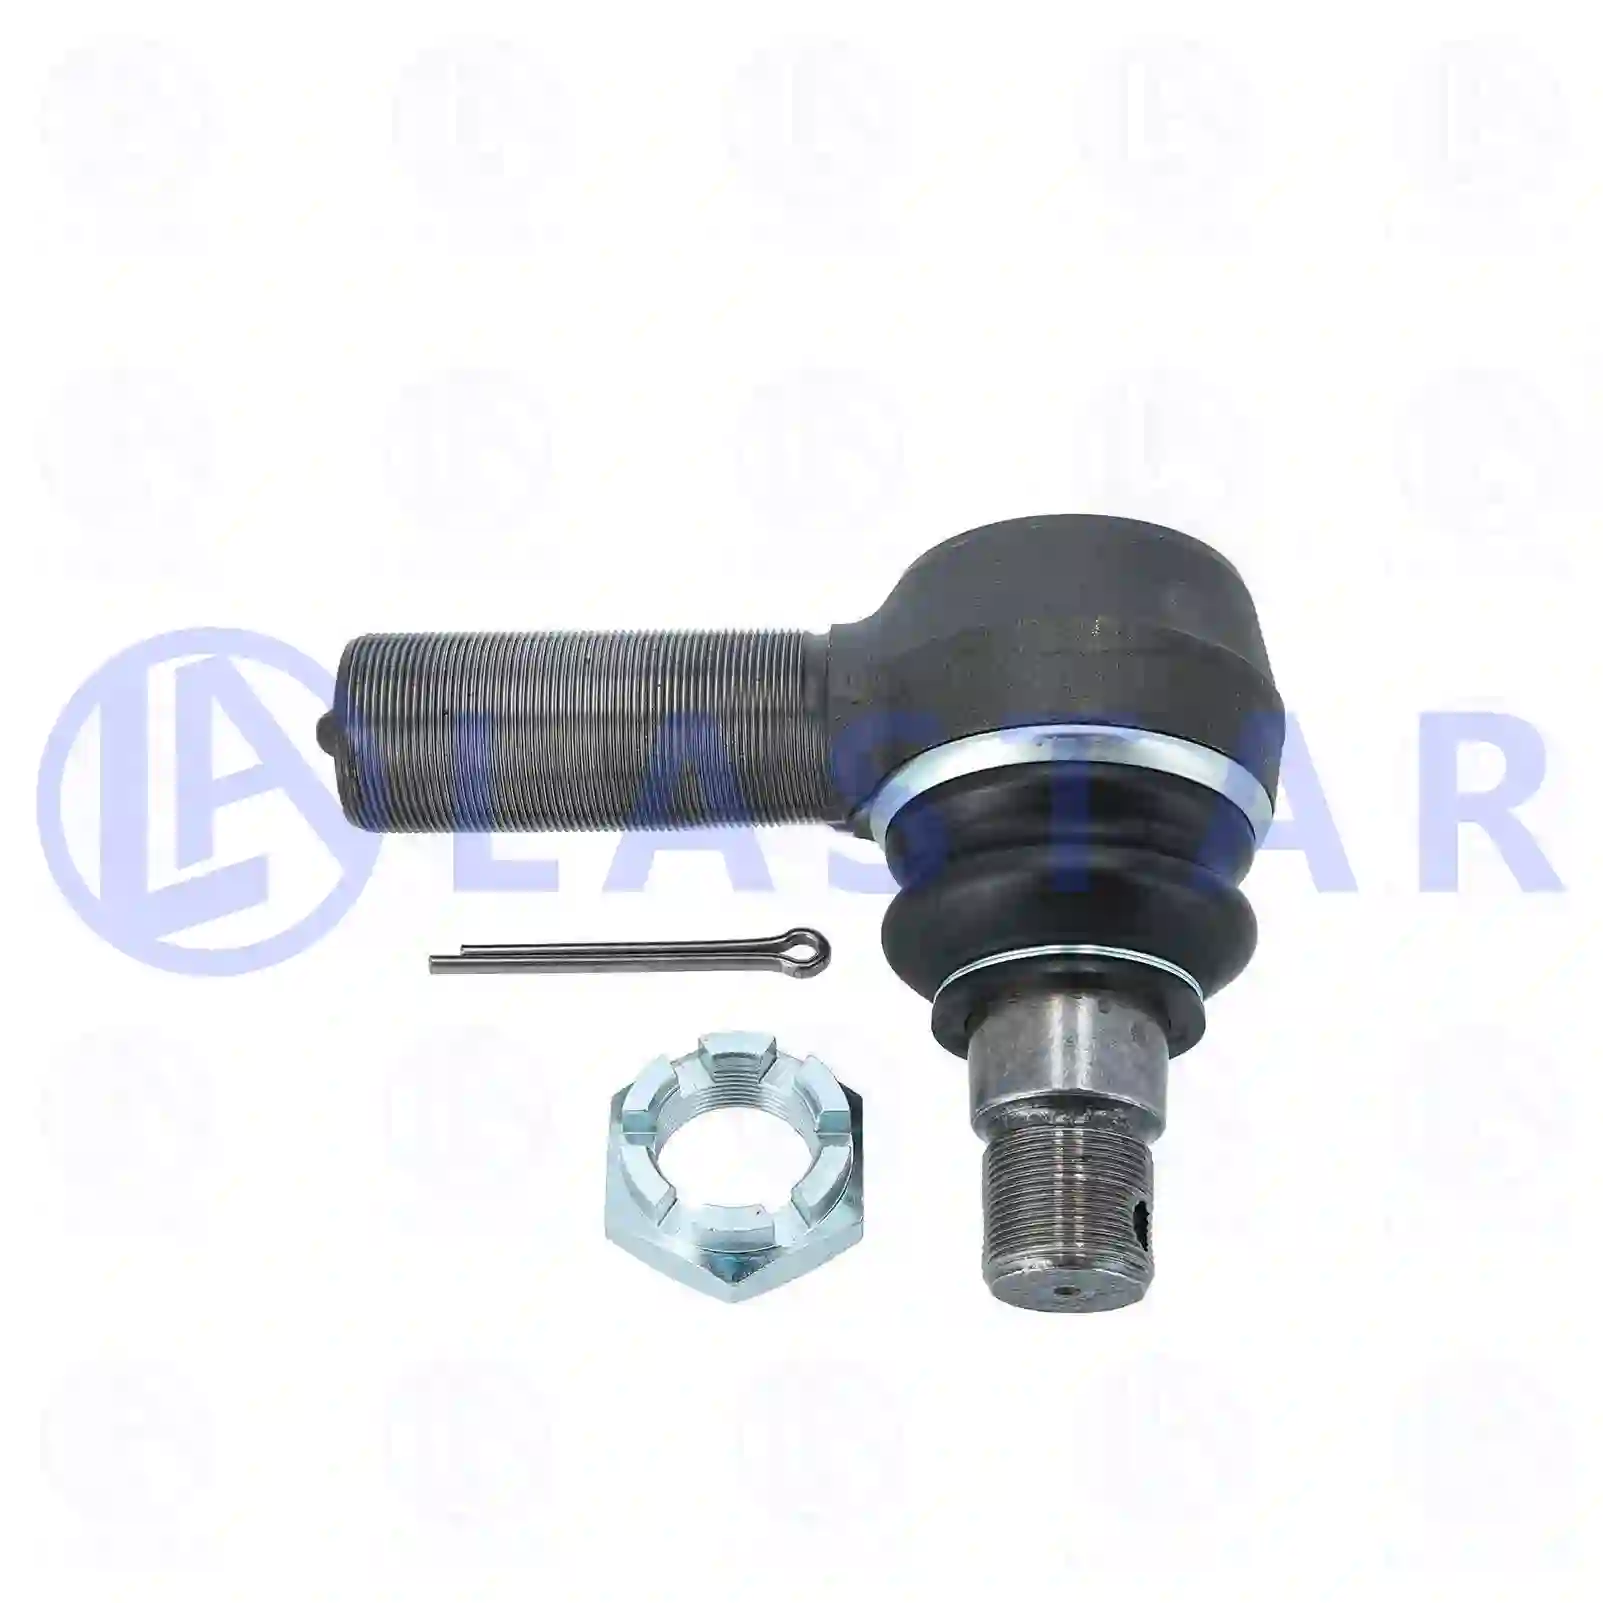 Drag Link Ball joint, right hand thread, la no: 77705372 ,  oem no:00101347, 00113251, 98133359, 0218081200, 634303130, 0697221, 697221, F4560S, 8408377, 99707030168, 99708408377, 01686516, 81953016295, 81953016297, 0004601748, 120322305, 53X001A, 2205000400, 6851491000, 5605300511, ZG40392-0008 Lastar Spare Part | Truck Spare Parts, Auotomotive Spare Parts